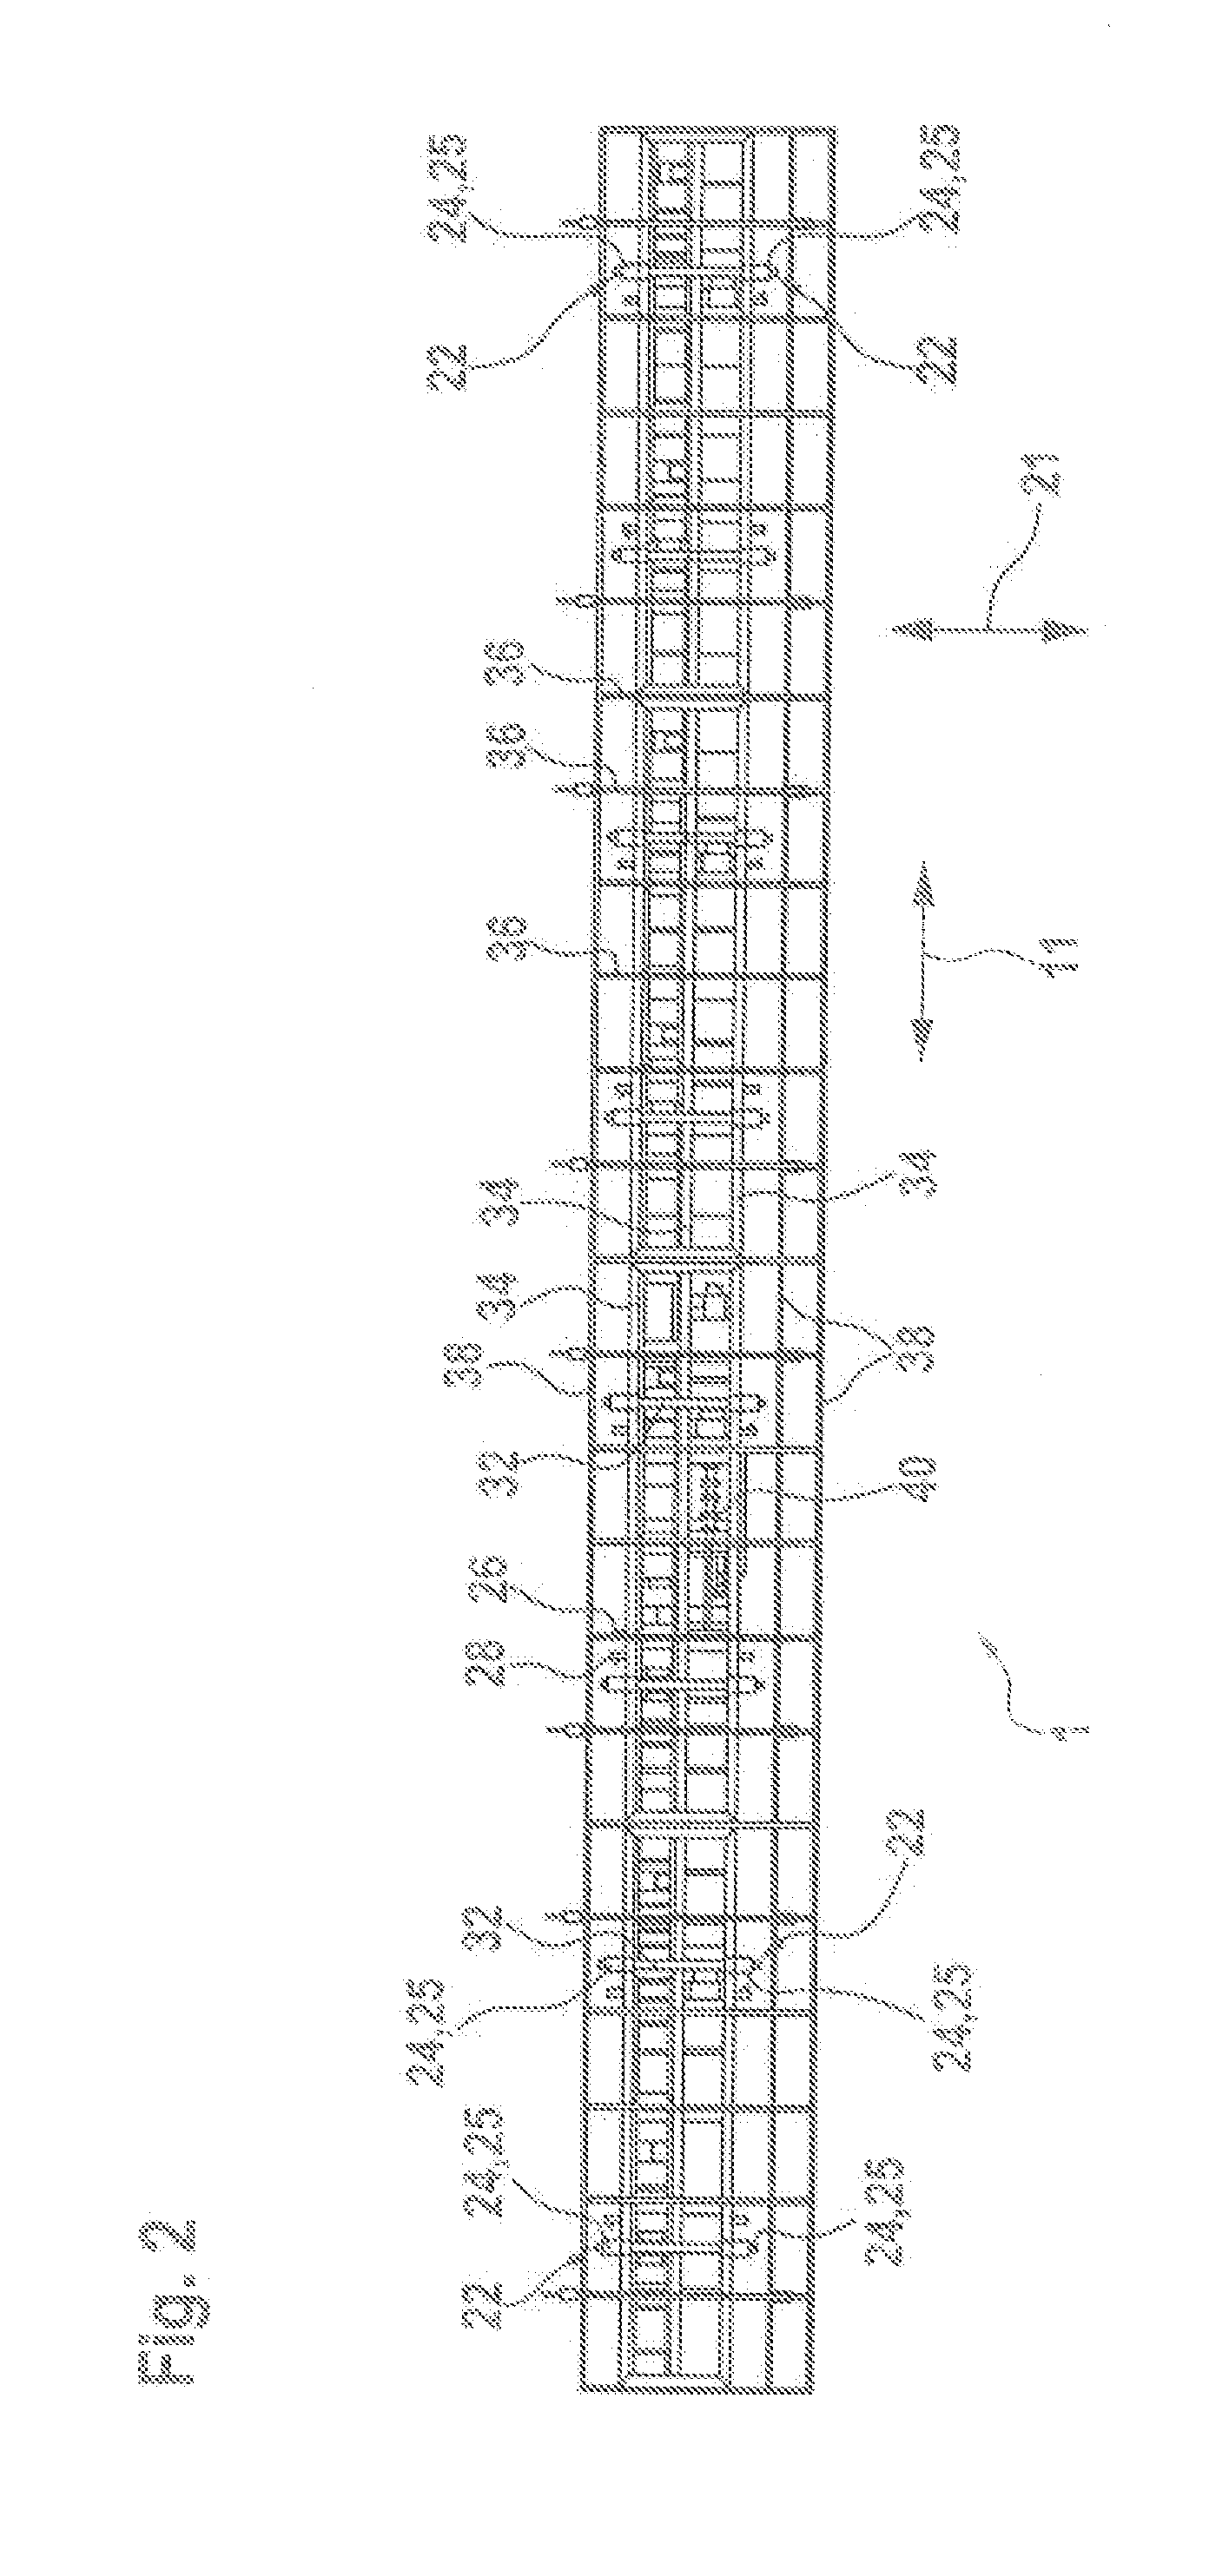 Handling device for handling a rotor blade mold for producing a rotor blade of a wind turbine